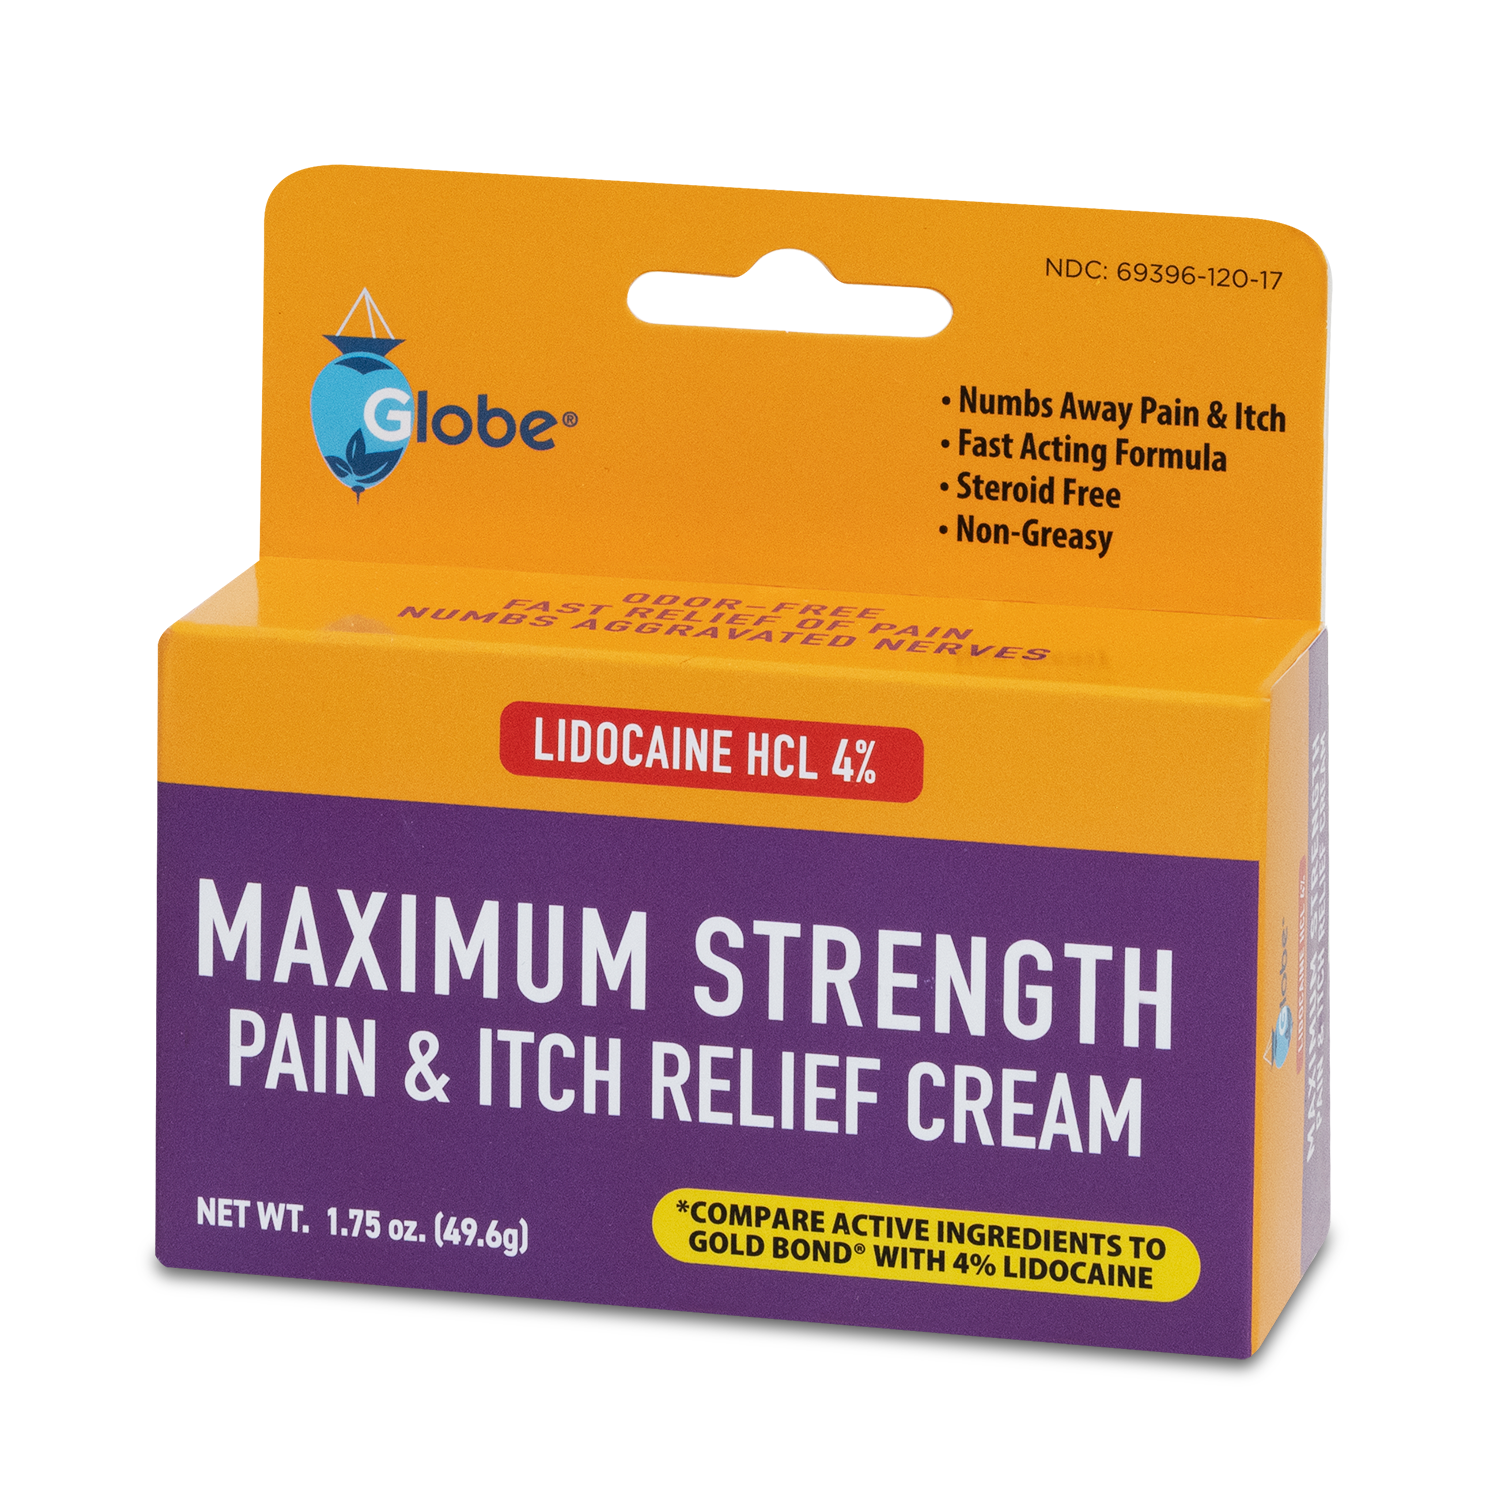 Globe Lidocaine 4% Multi-Symptom Relief Cream 1.75 oz., Numbs Away Pain & Itch, Steroid Free Non-Greasy Formula (Compare to Gold Bond w/ Lidocaine)